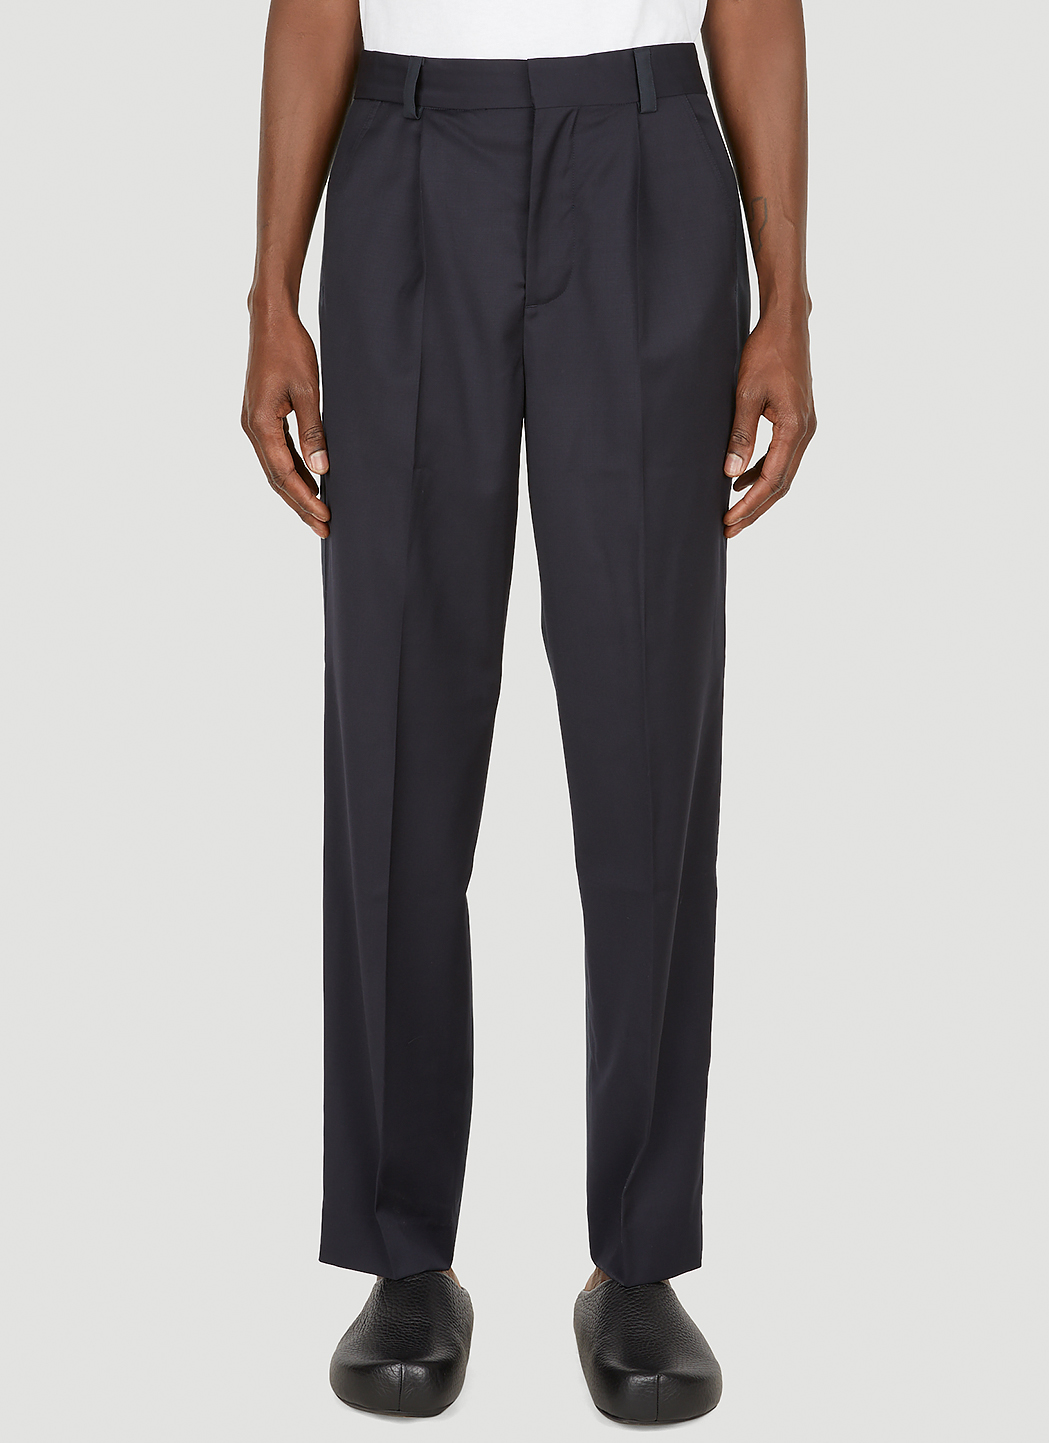 Tailored Contrast Panel Pants